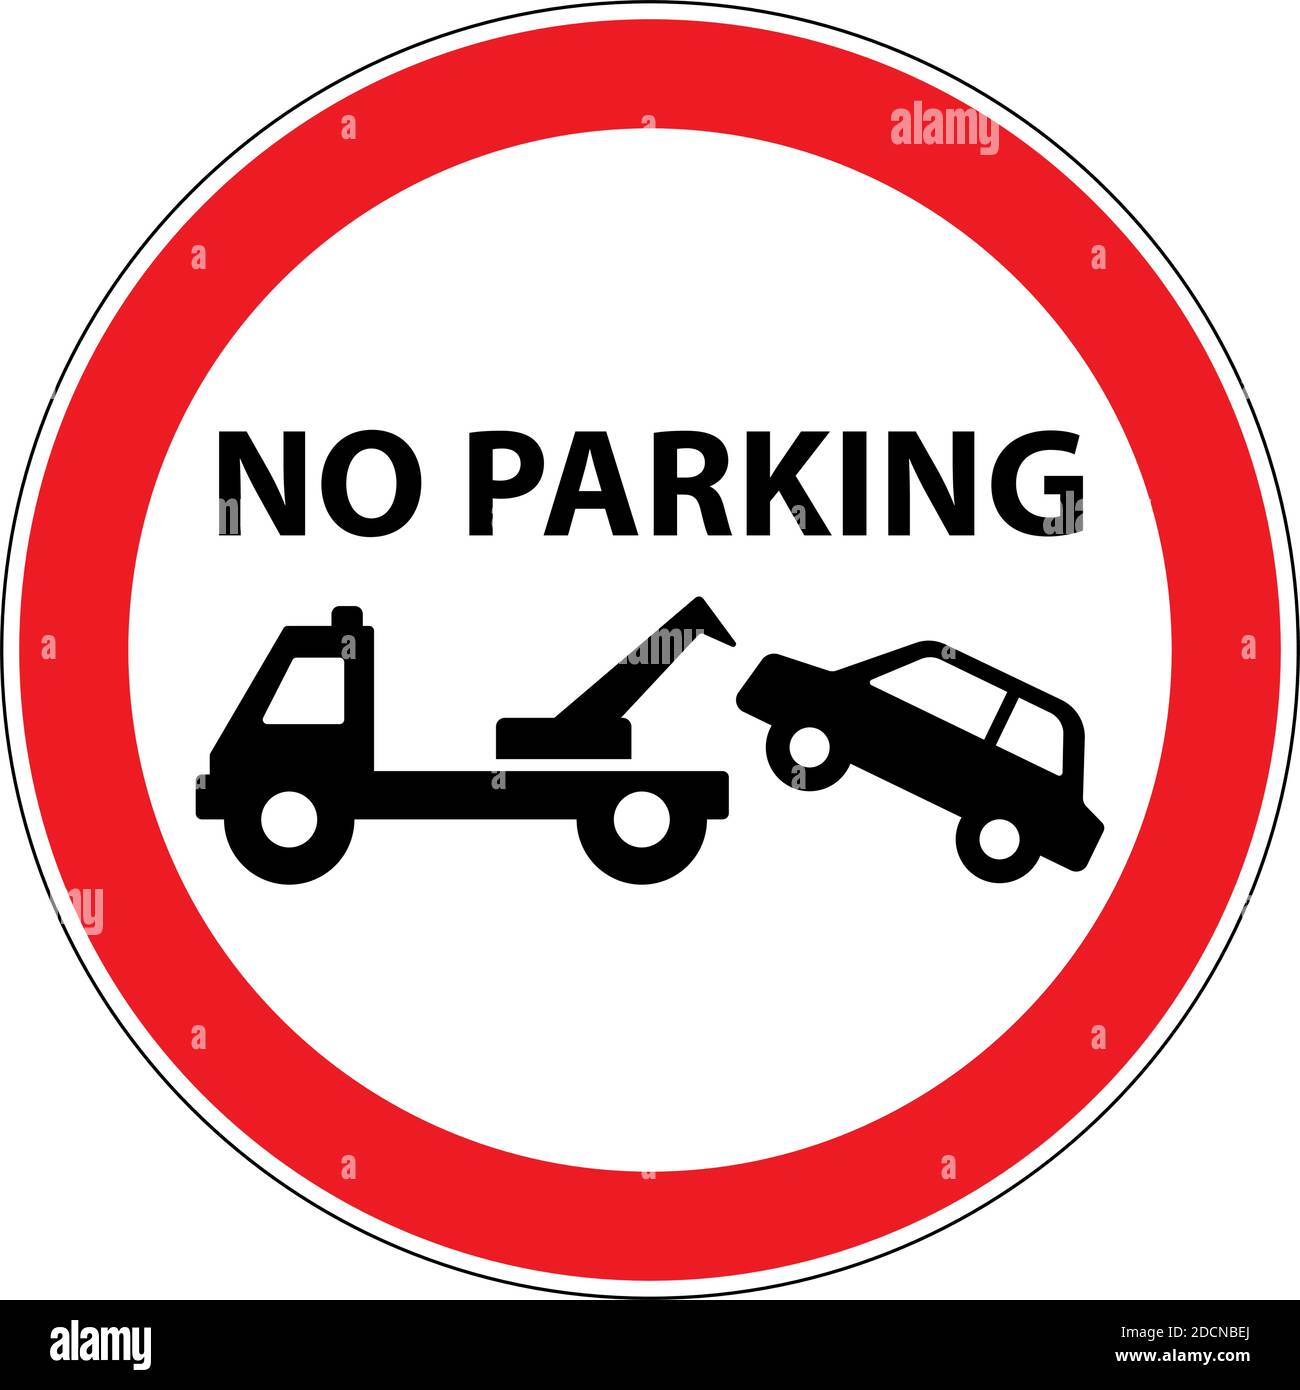 No parking car tow warning sign with round shape and red frame Stock Vector